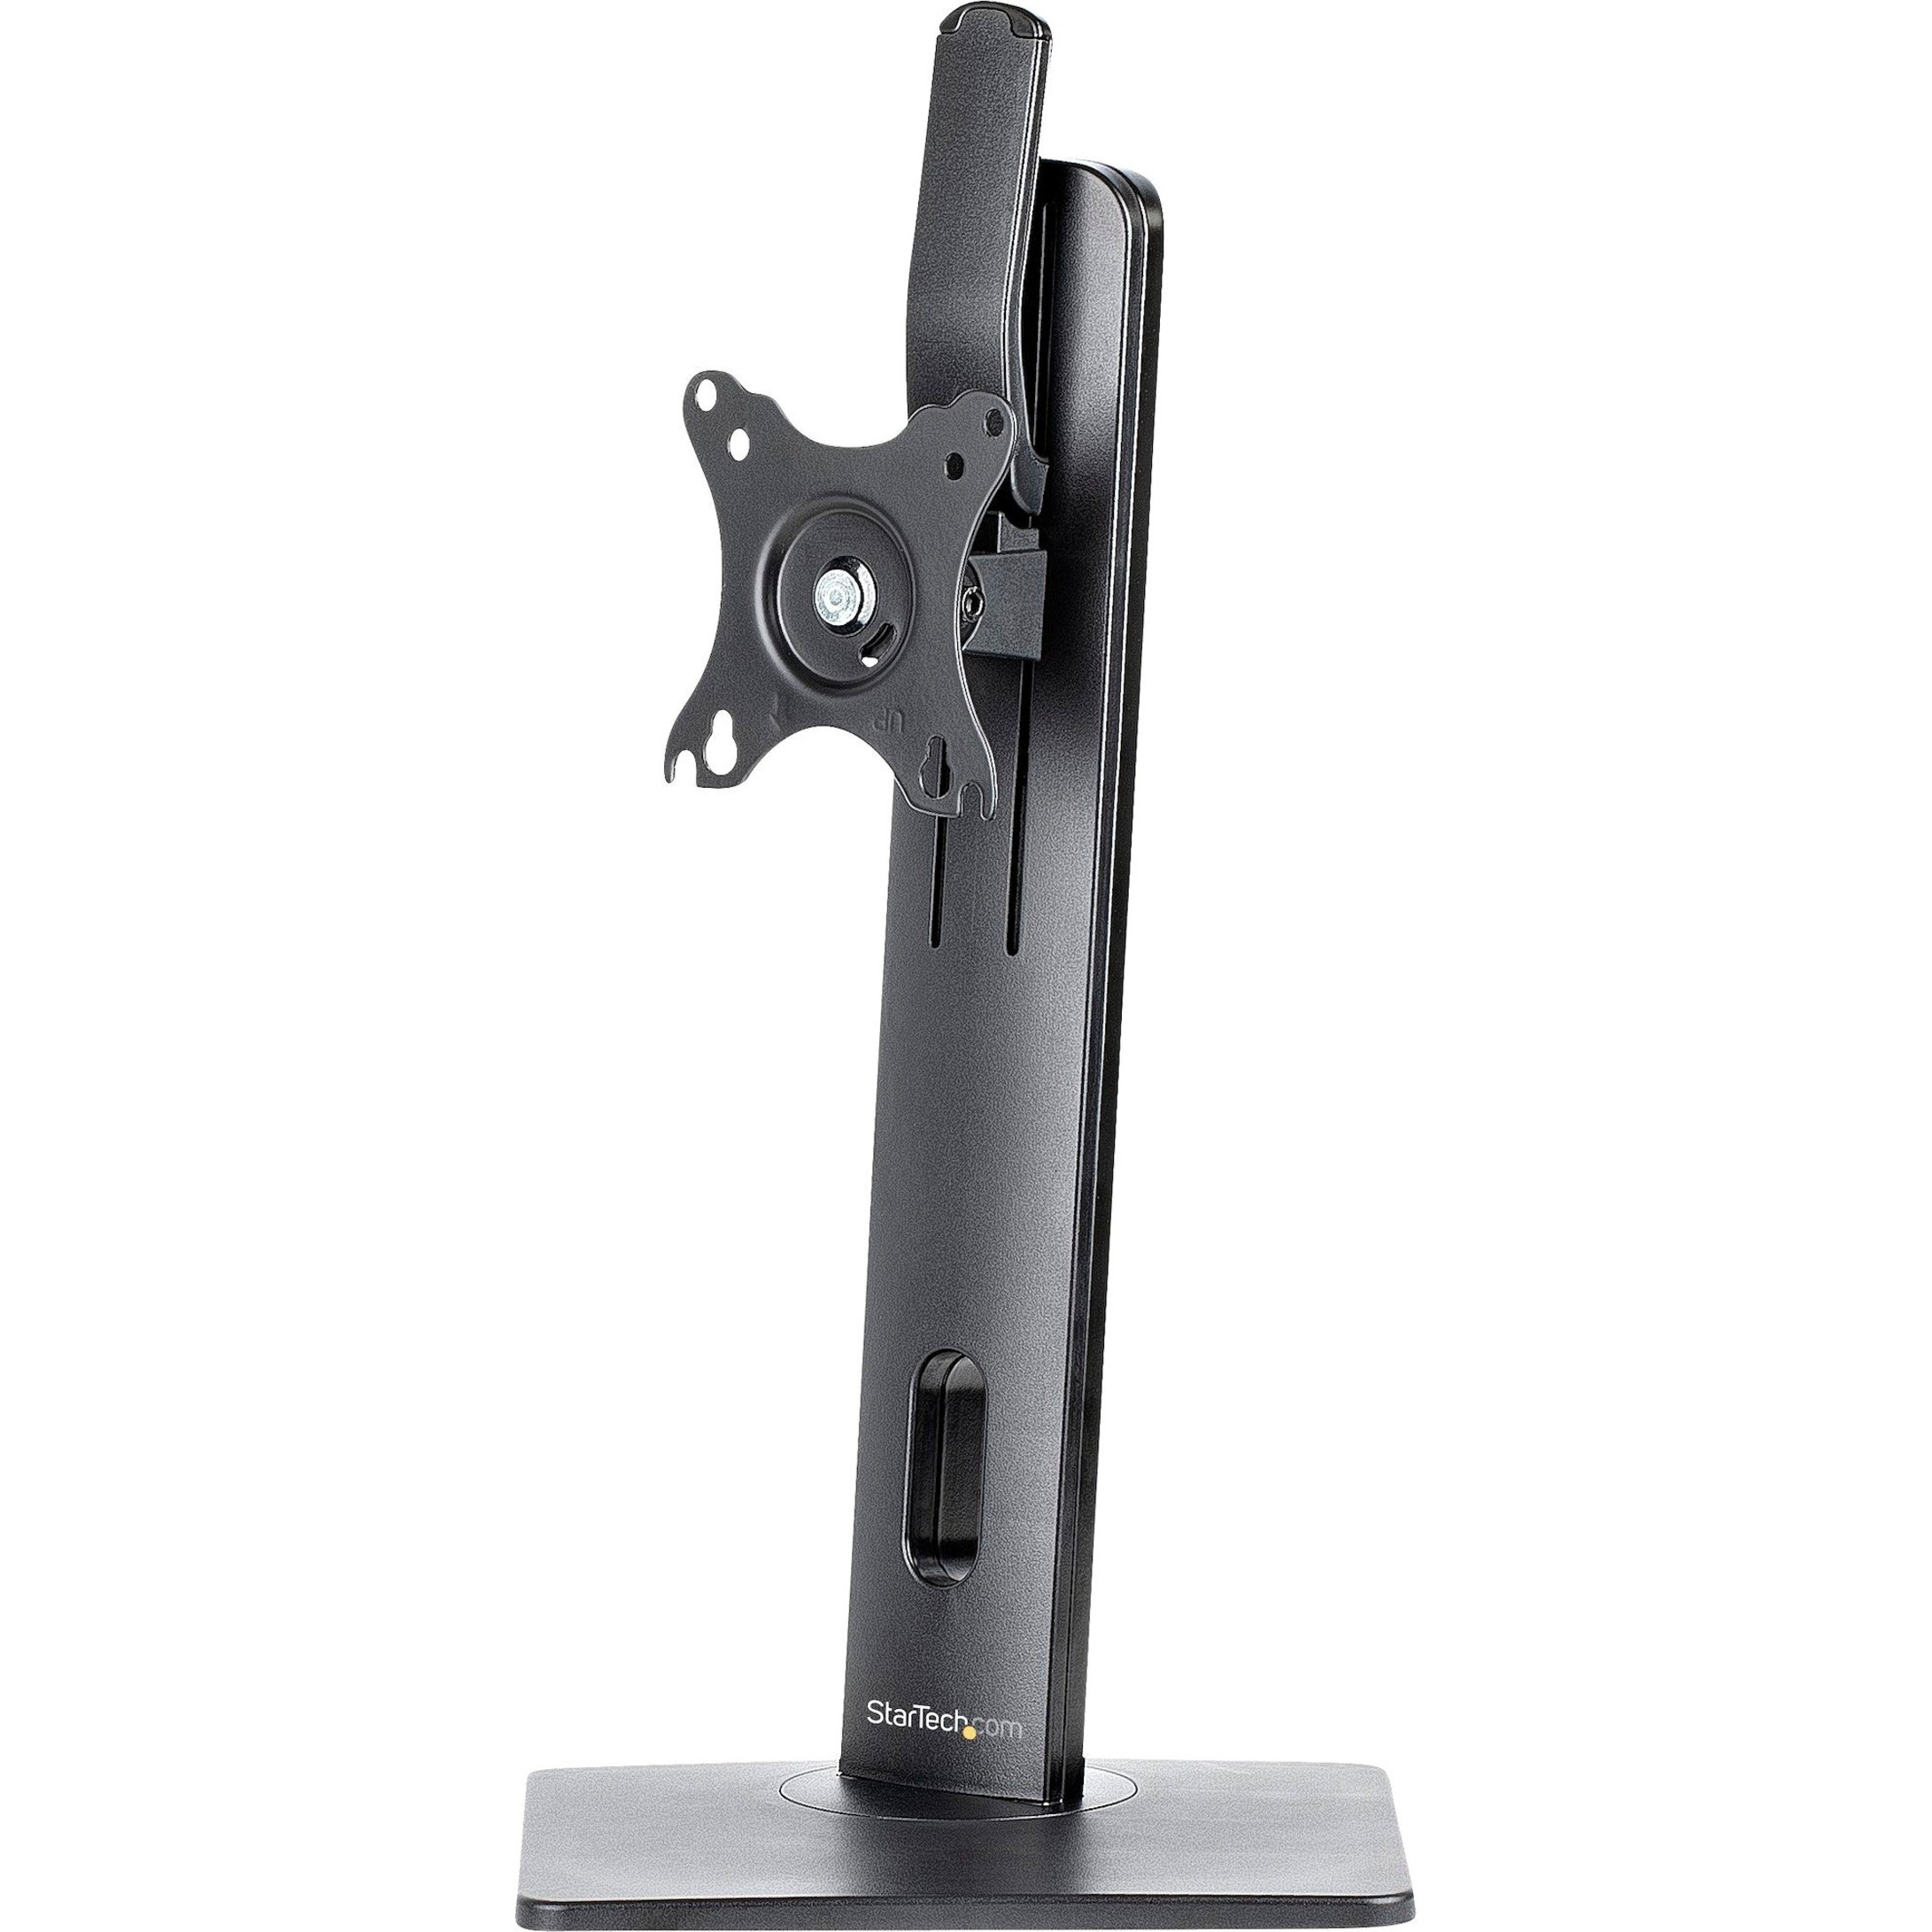 Four Monitor Stand - Freestanding, 5 Years Warranty (4MSFB 2.0)